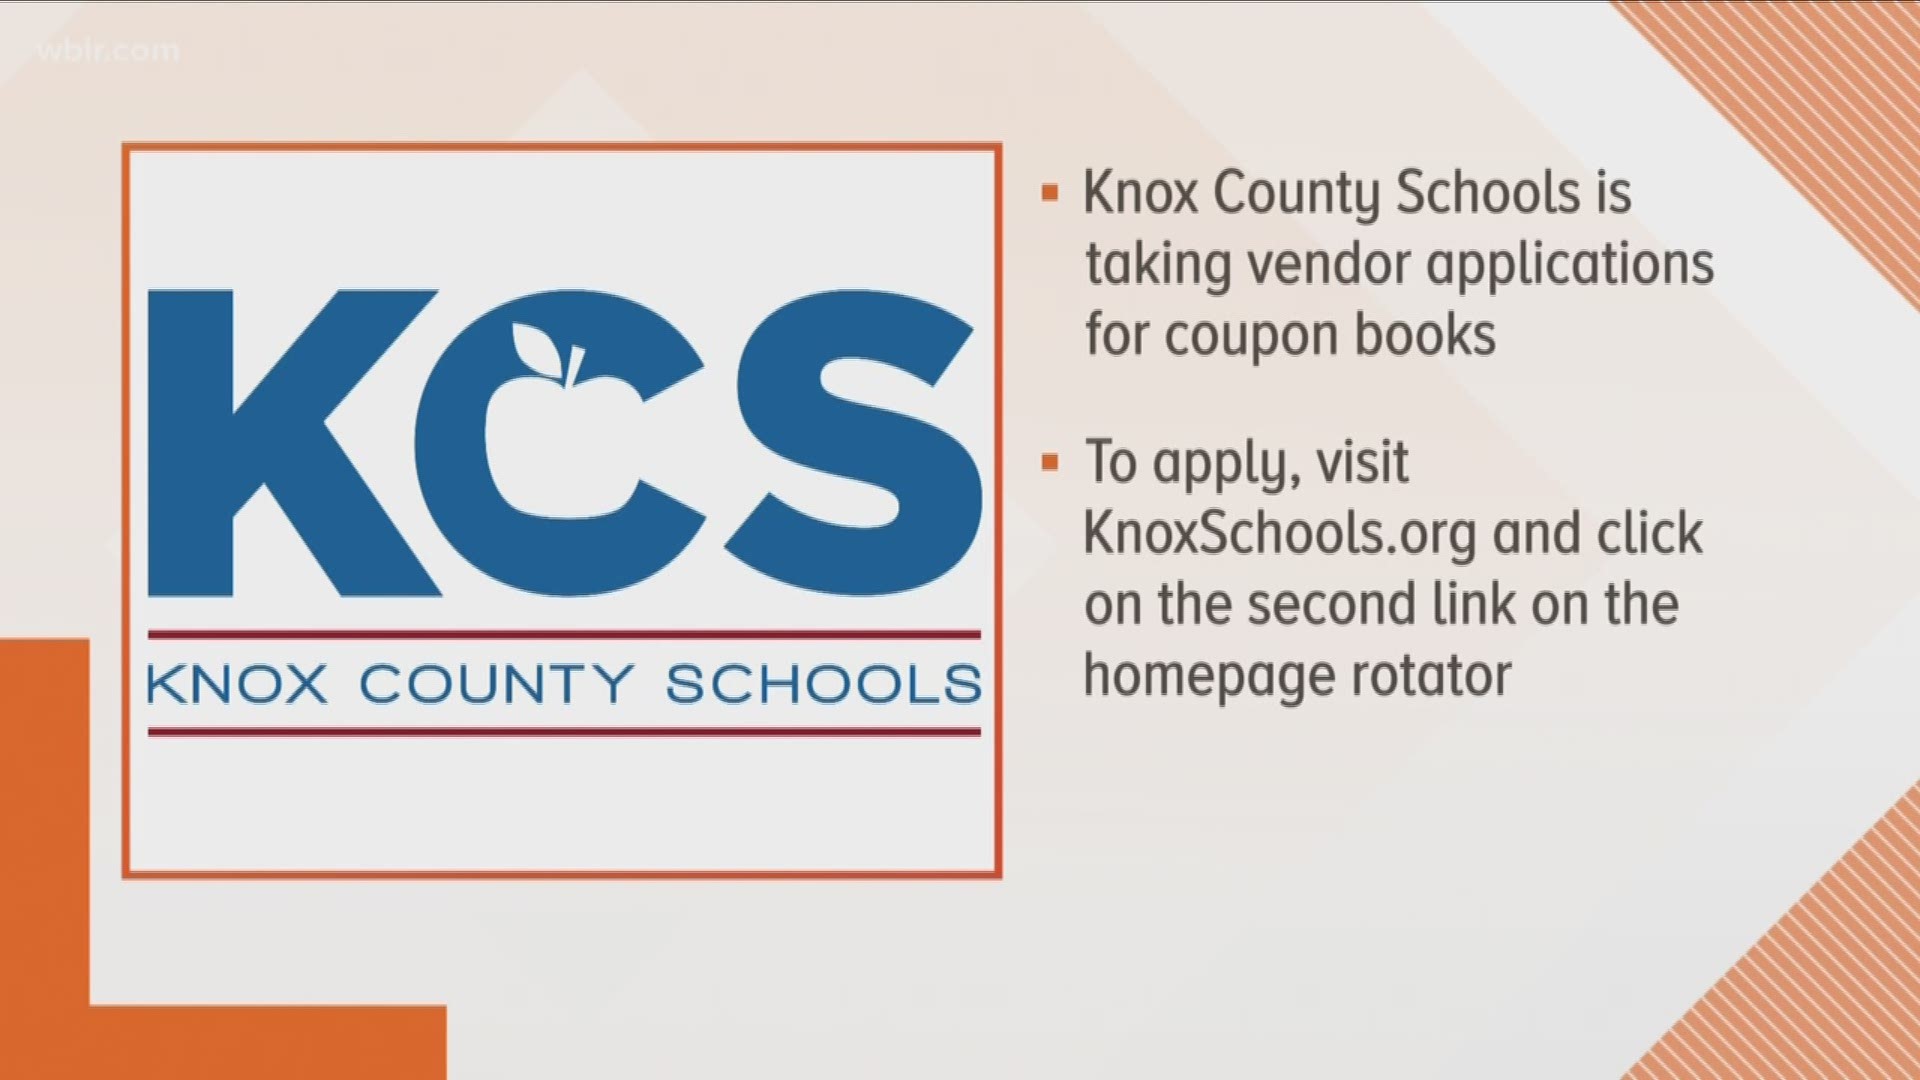 The deadline for vendors to apply to get in the coupon book for Knox County Schools is coming soon. KCS will accept applications through June 15.